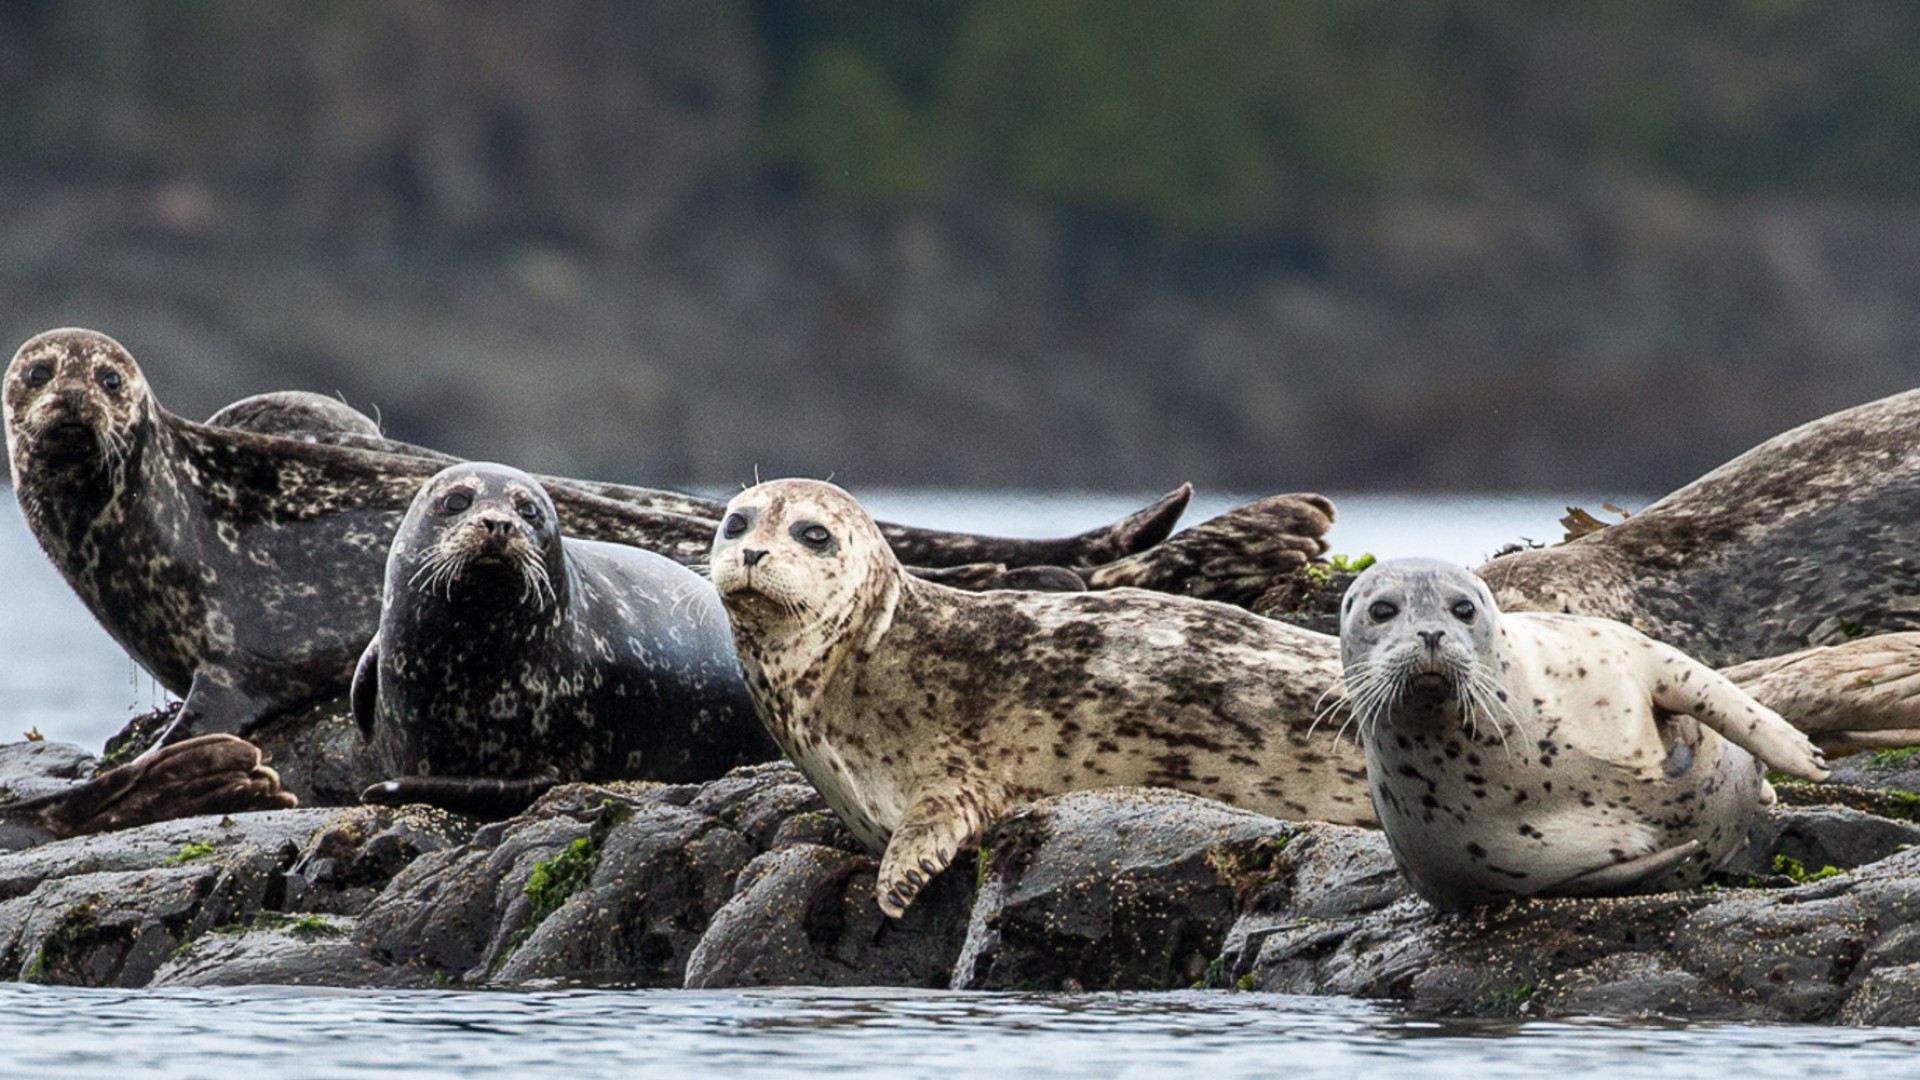 Seals perched on a rock in the Johnstone Strait making perfect eye contact